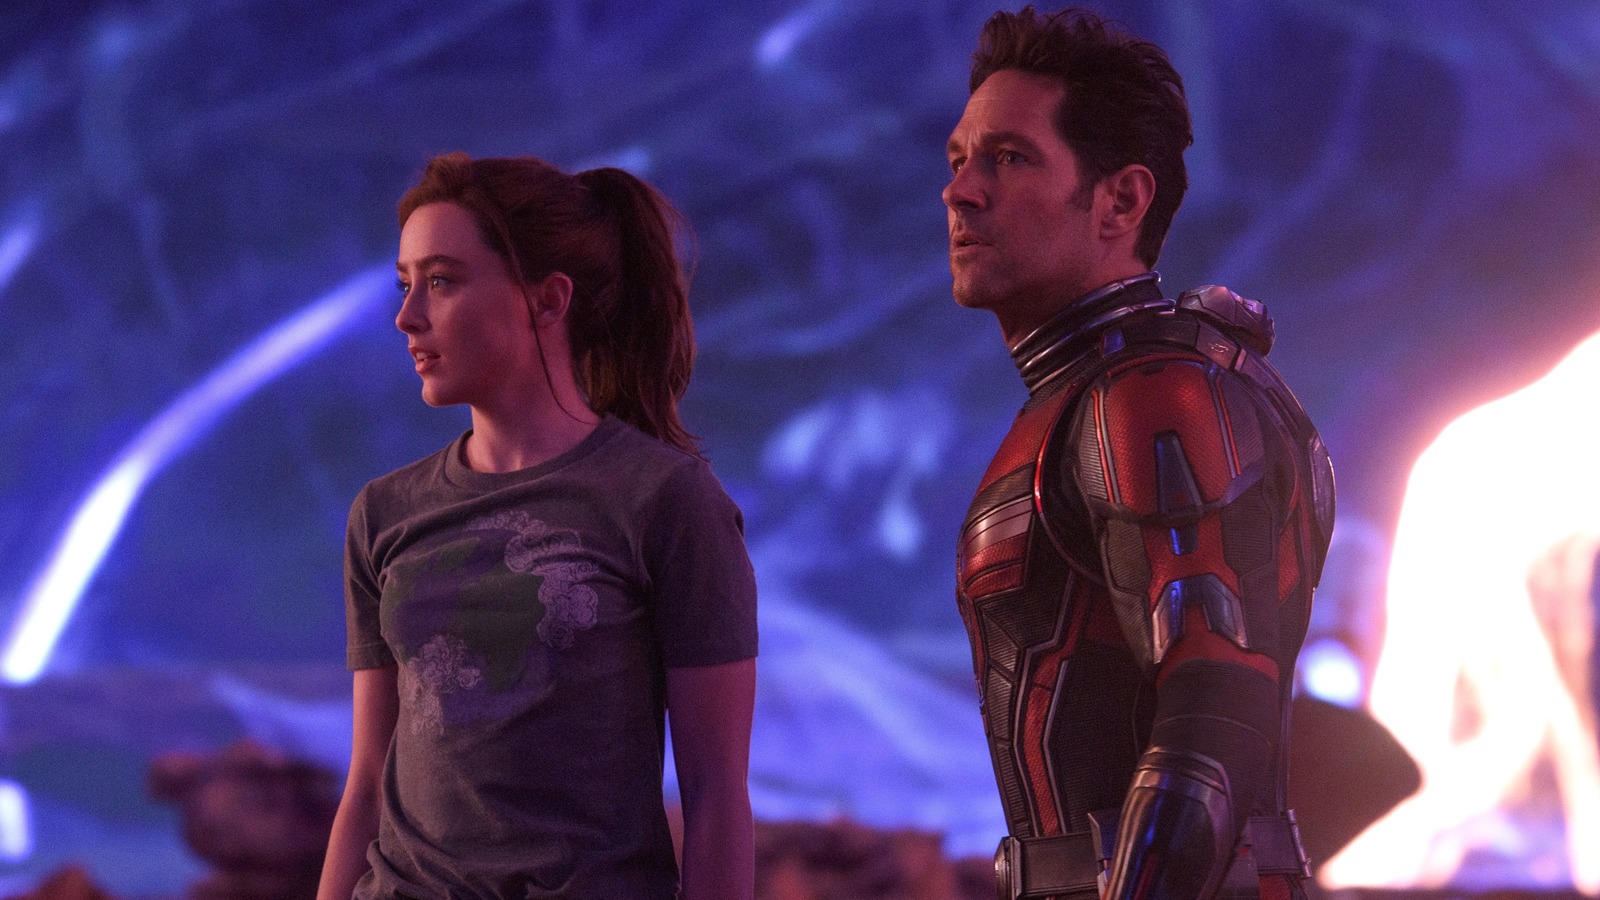 Watch Assembled: The Making of Ant-Man and the Wasp: Quantumania